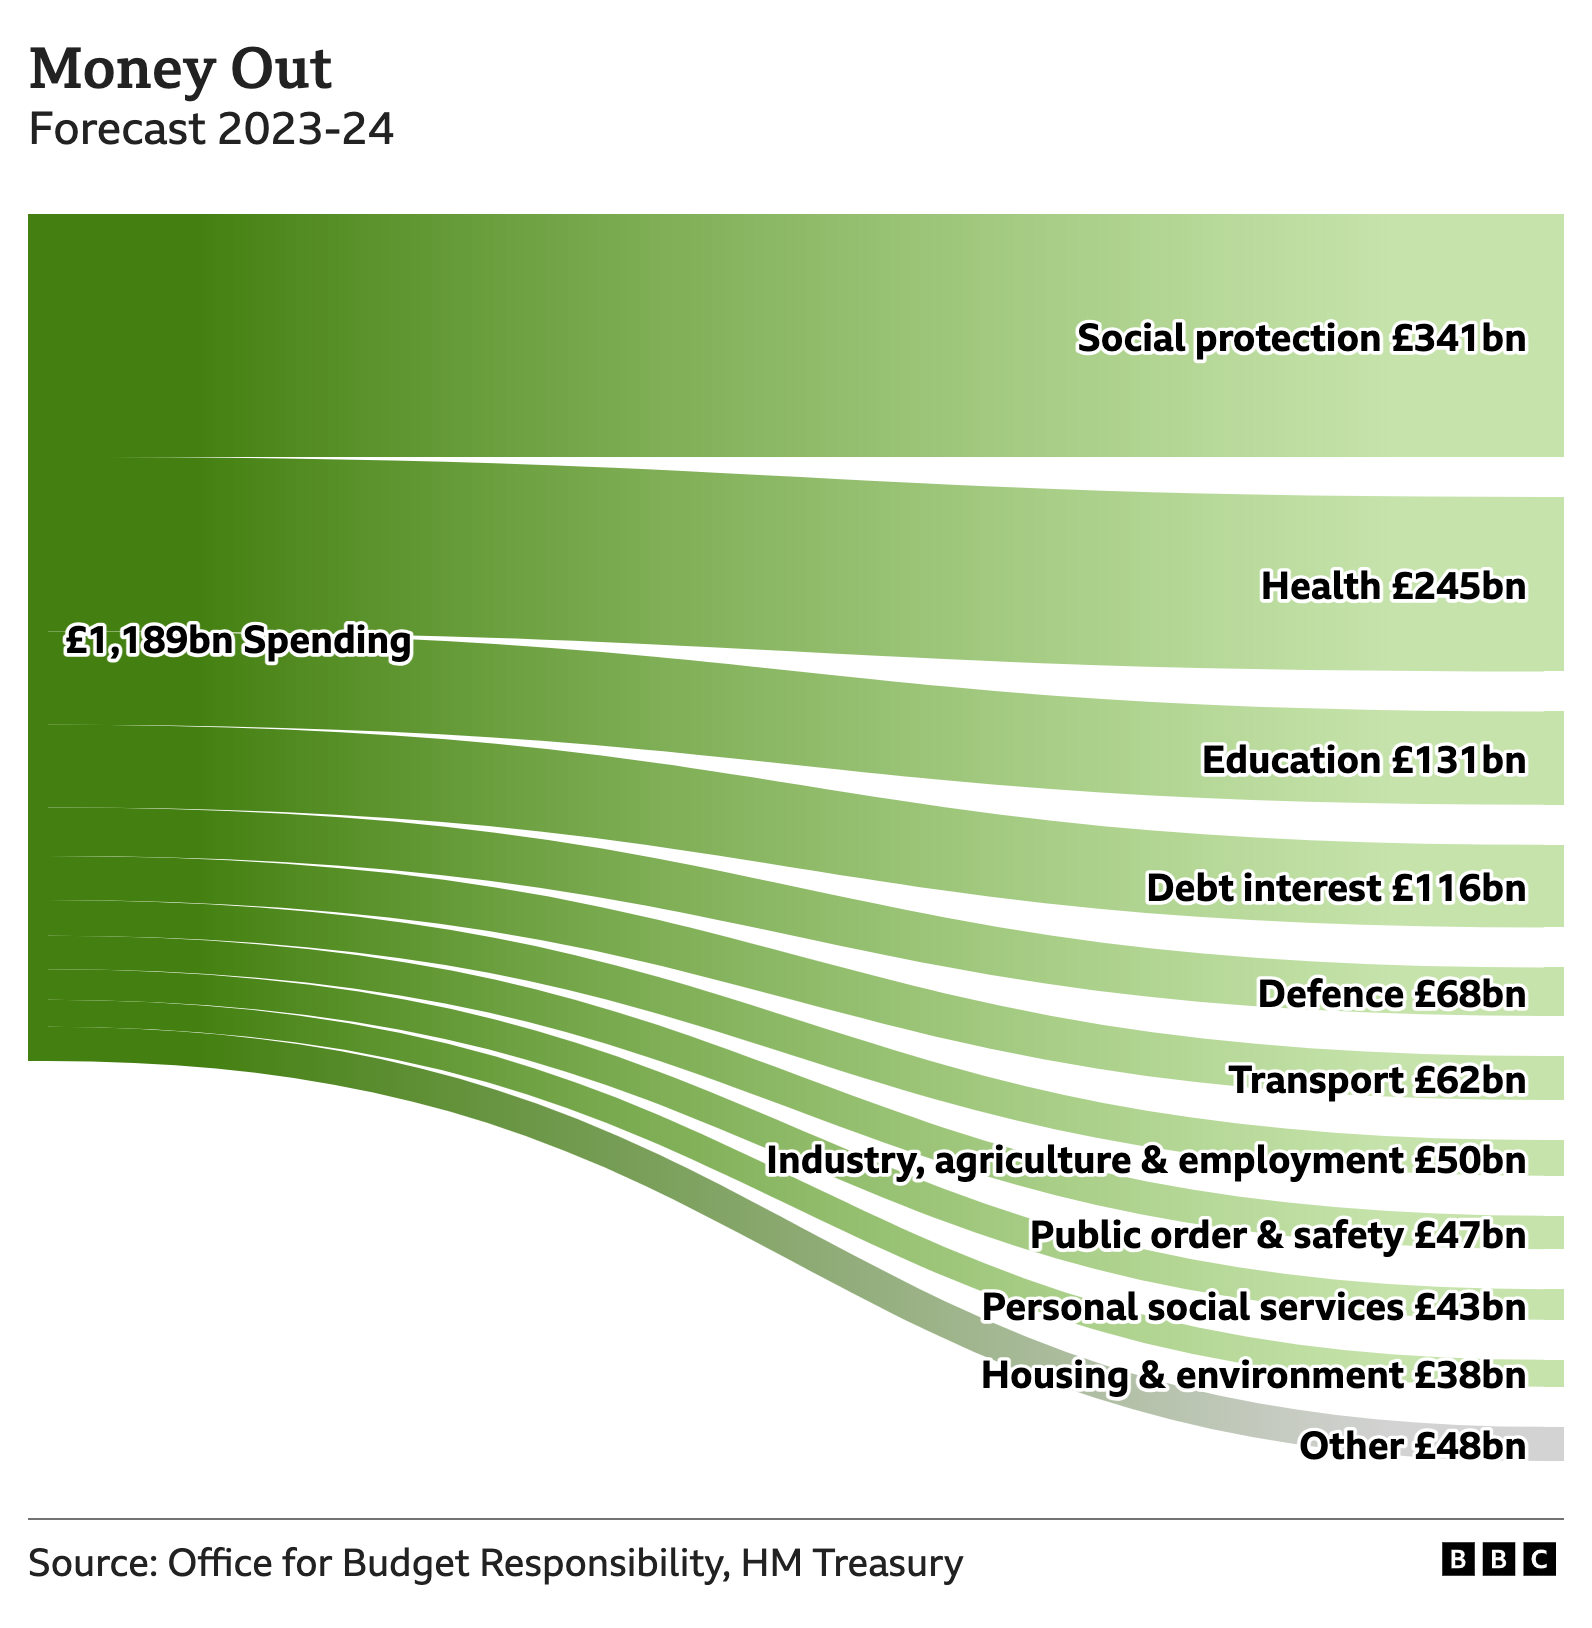 Chart showing how the government is expected to spend £1189bn this year. Social protection is the top category at £341bn followed by health at £245bn and education at £131bn.